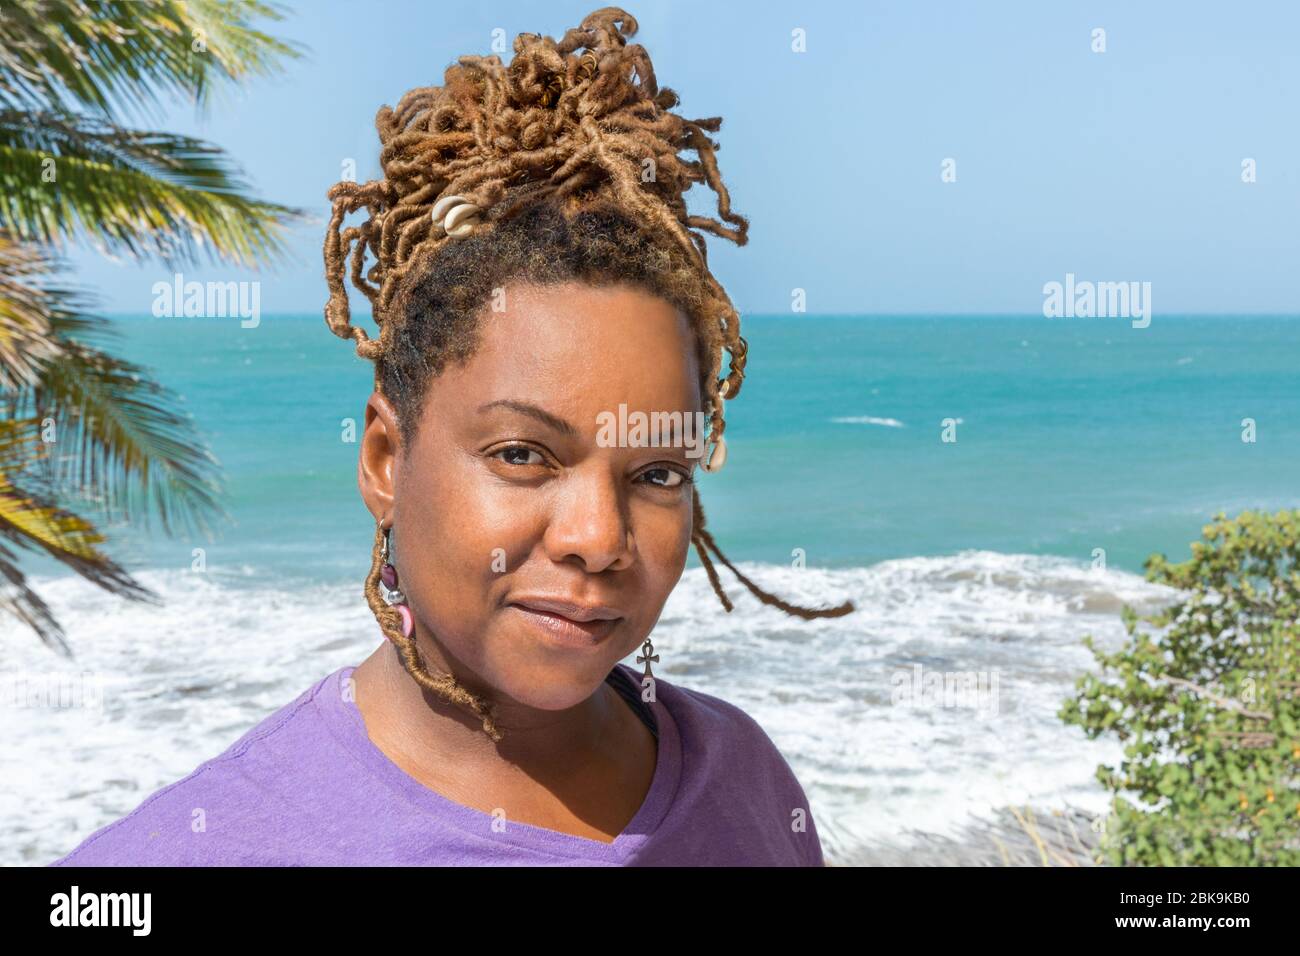 Close Up Portrait of Beautiful Black, African, or Carribean woman looking serious outdoors overlooking gorgeous beach and ocean. Stock Photo